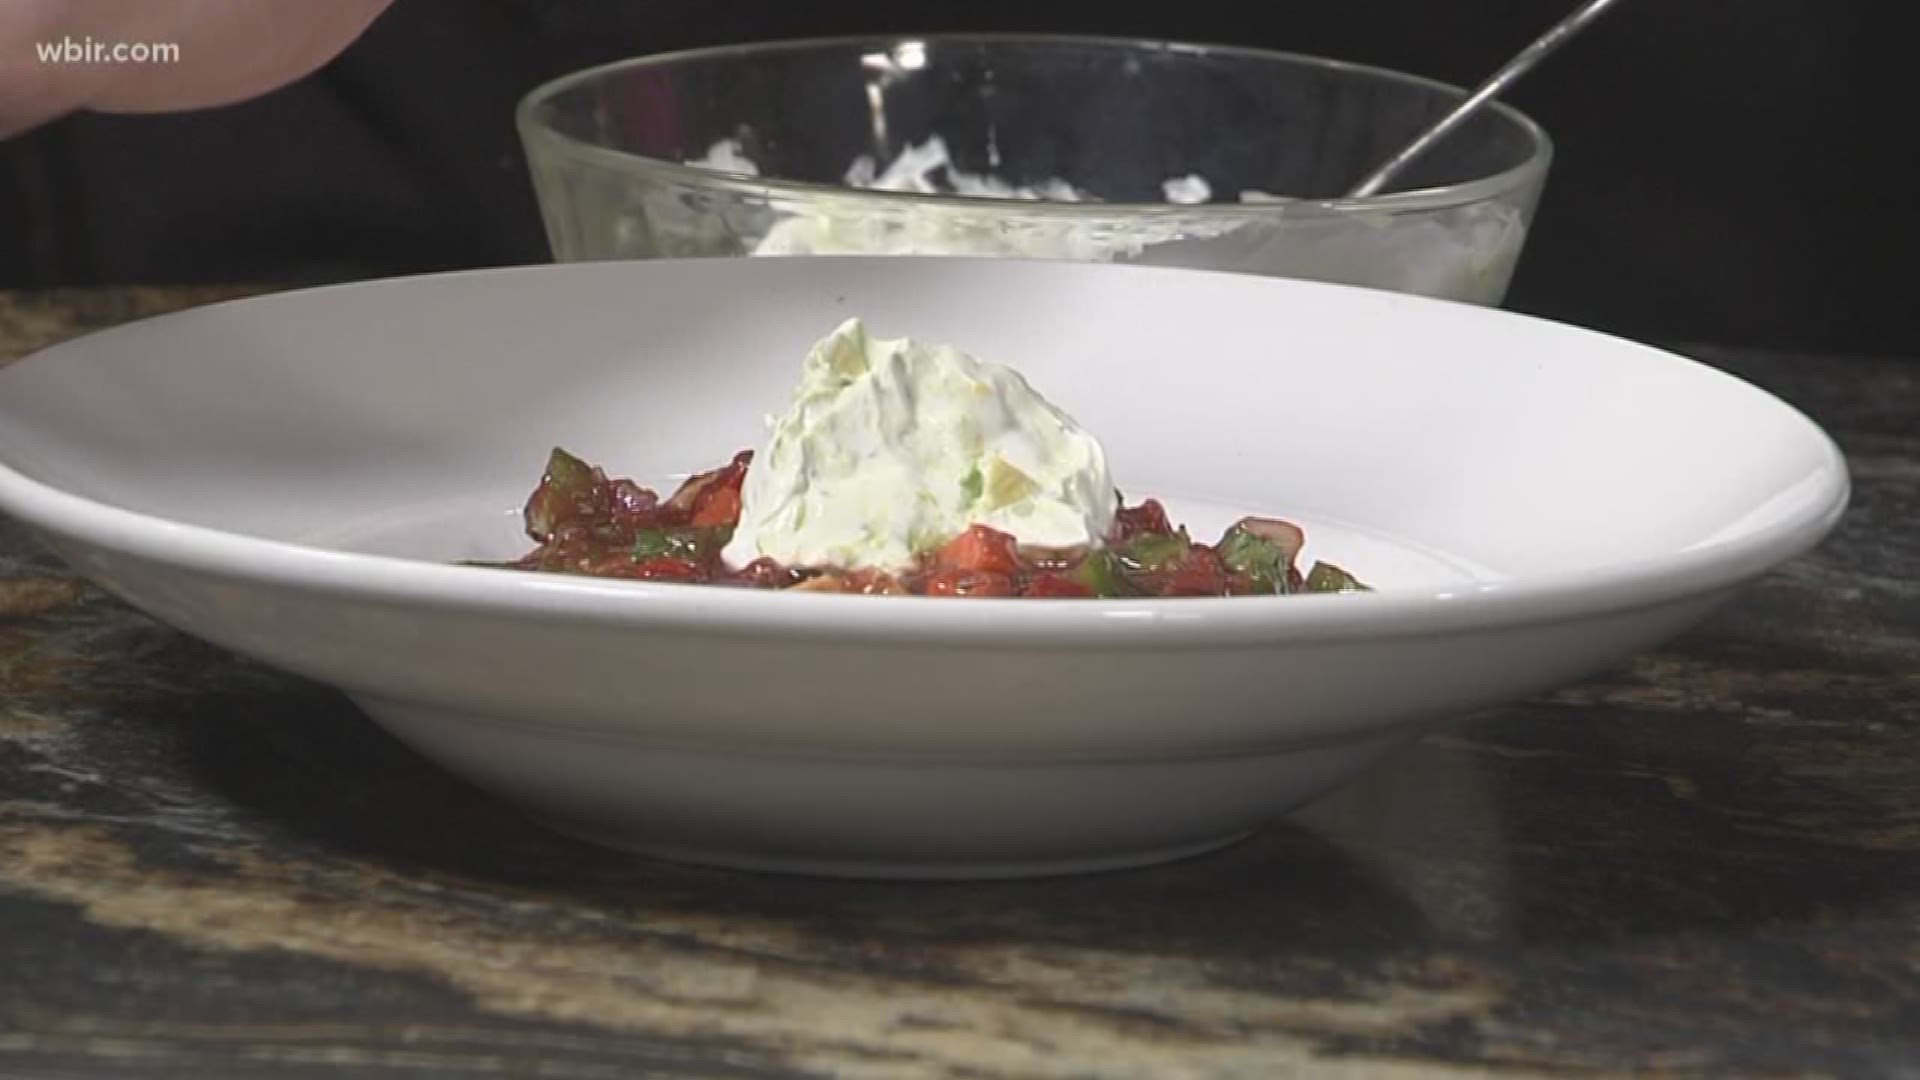 Chef Gary Nicely From Naples Italian Restaurant whips up a gazpacho with avocado sour cream!